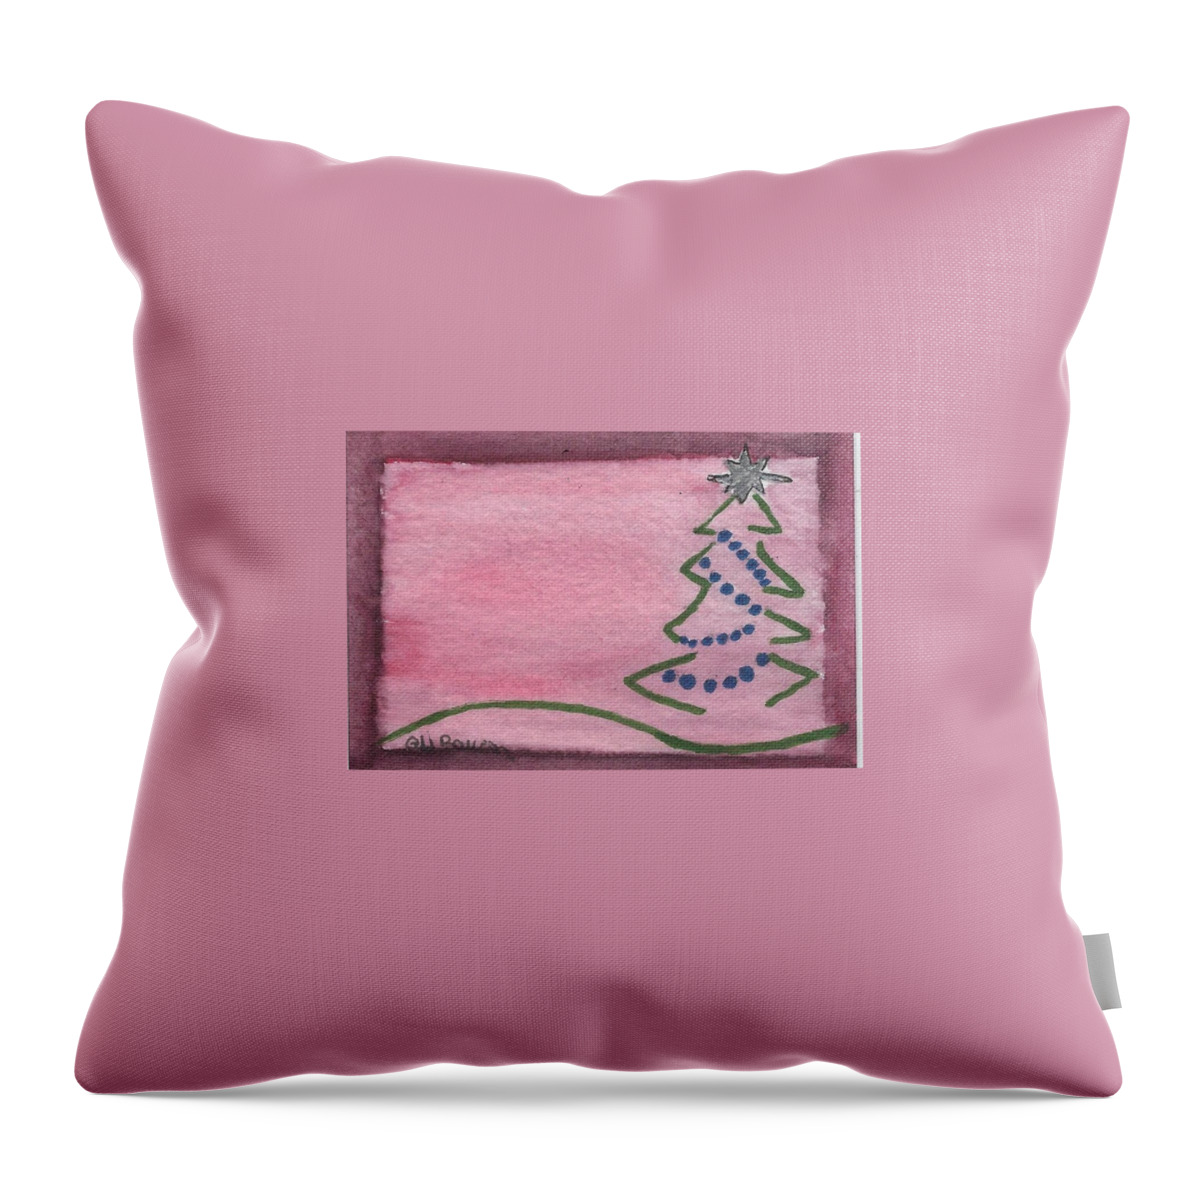 Christmas Throw Pillow featuring the painting O Christmas Tree by Ali Baucom